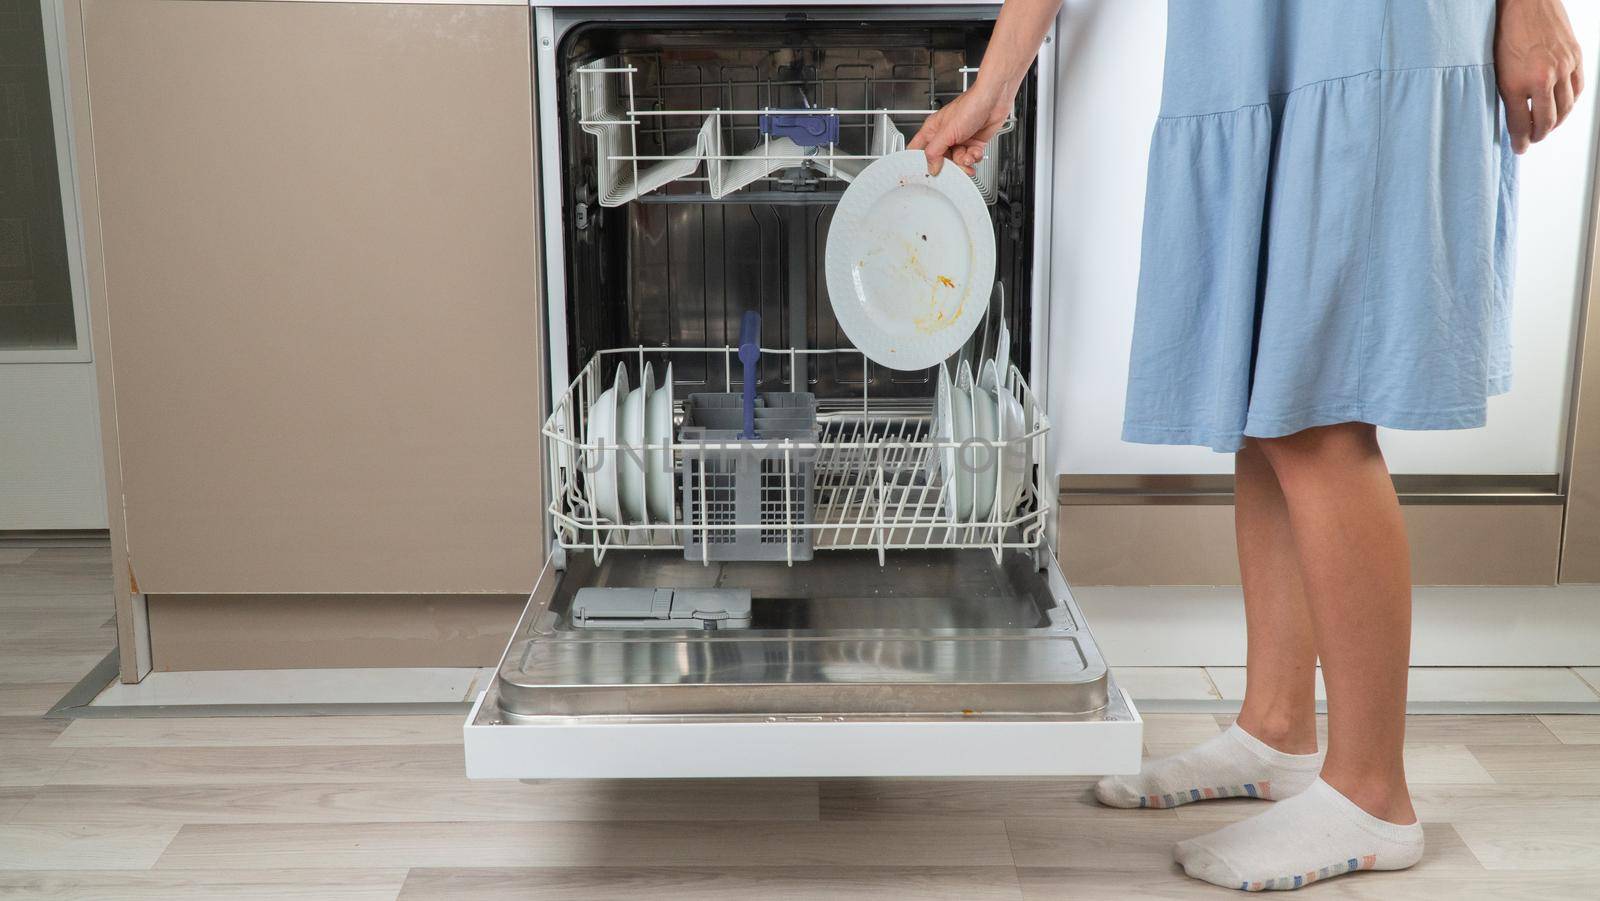 A housewife puts loading dirty dishes into the dishwasher front view